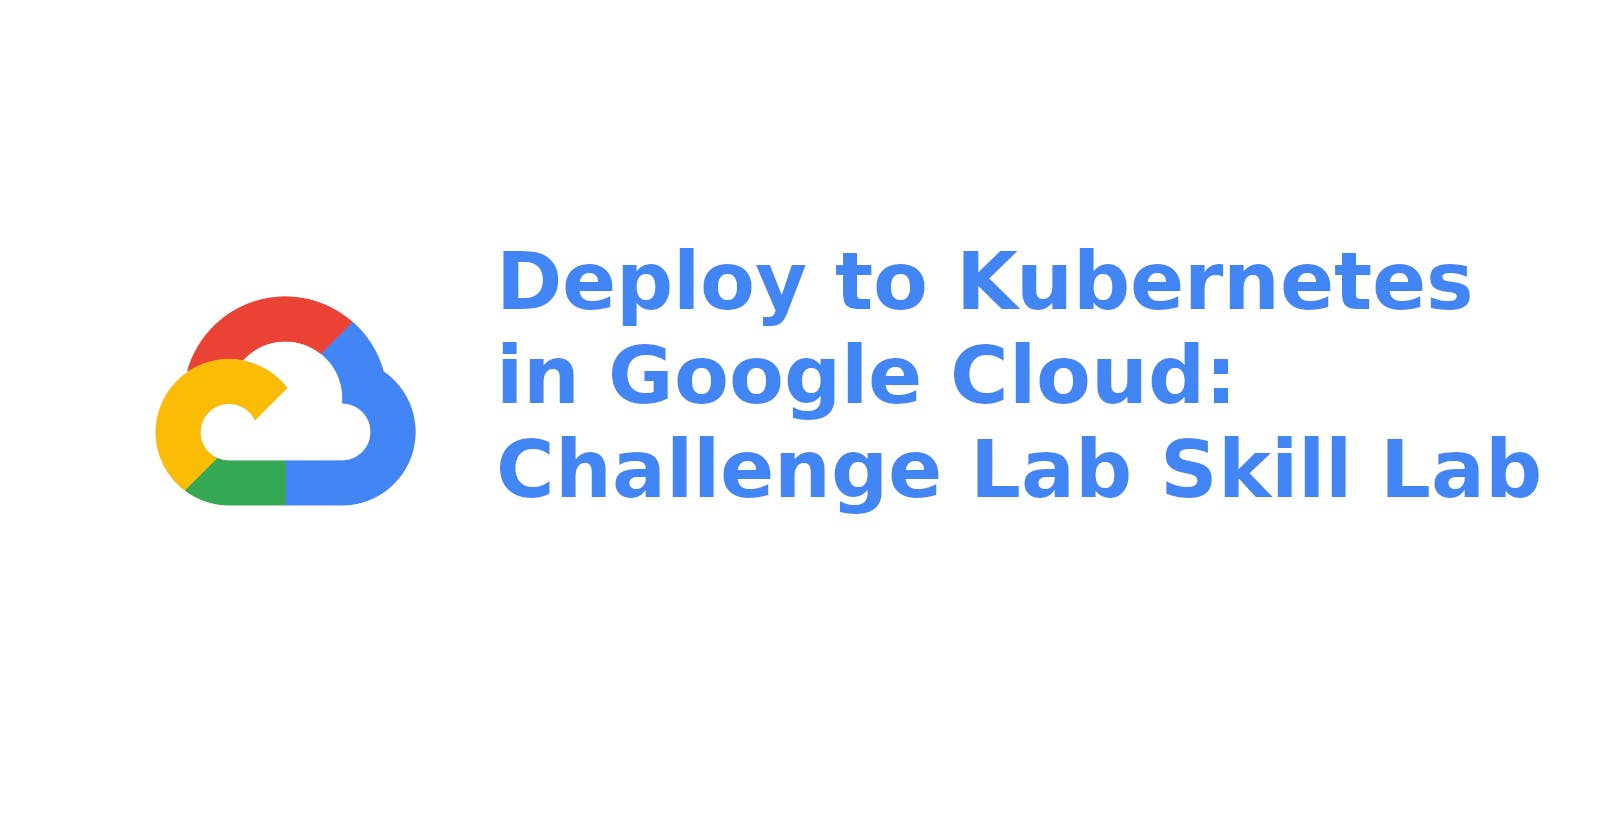 Deploy to Kubernetes in Google Cloud: Challenge Lab Skill Lab